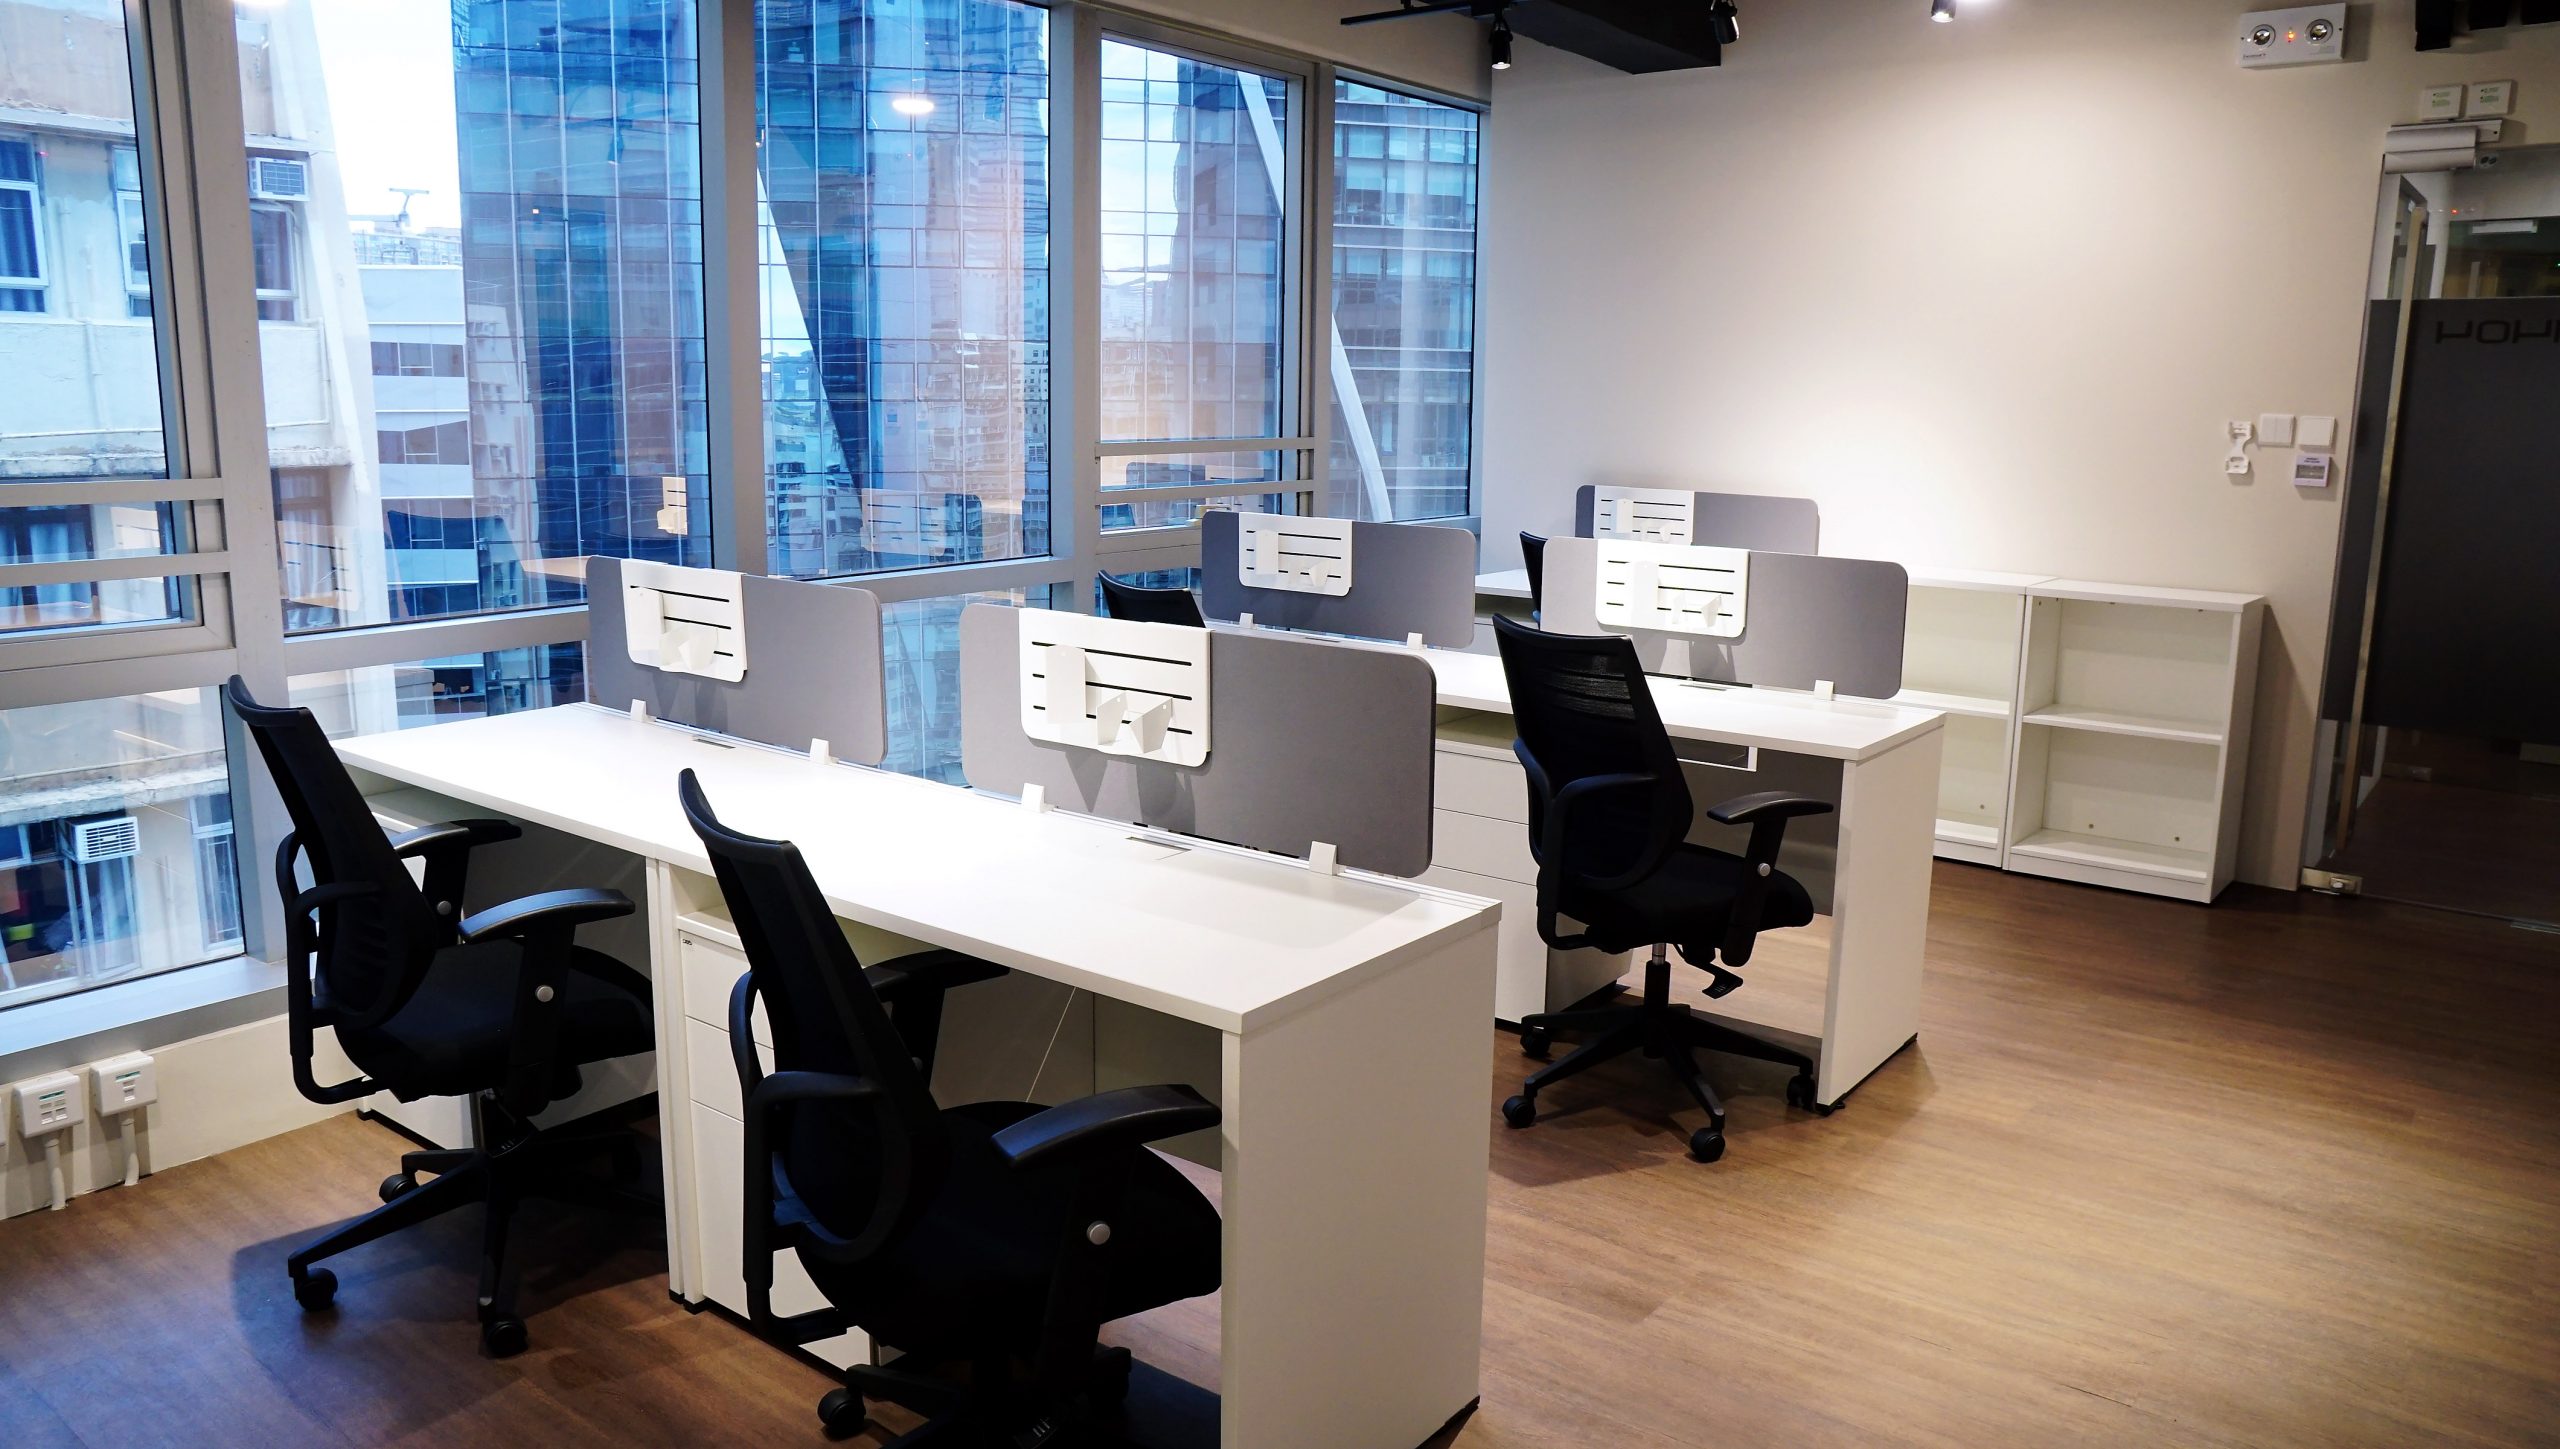 8-9pax Serviced Office, with basic office furniture and individual air conditioner, city landscape view